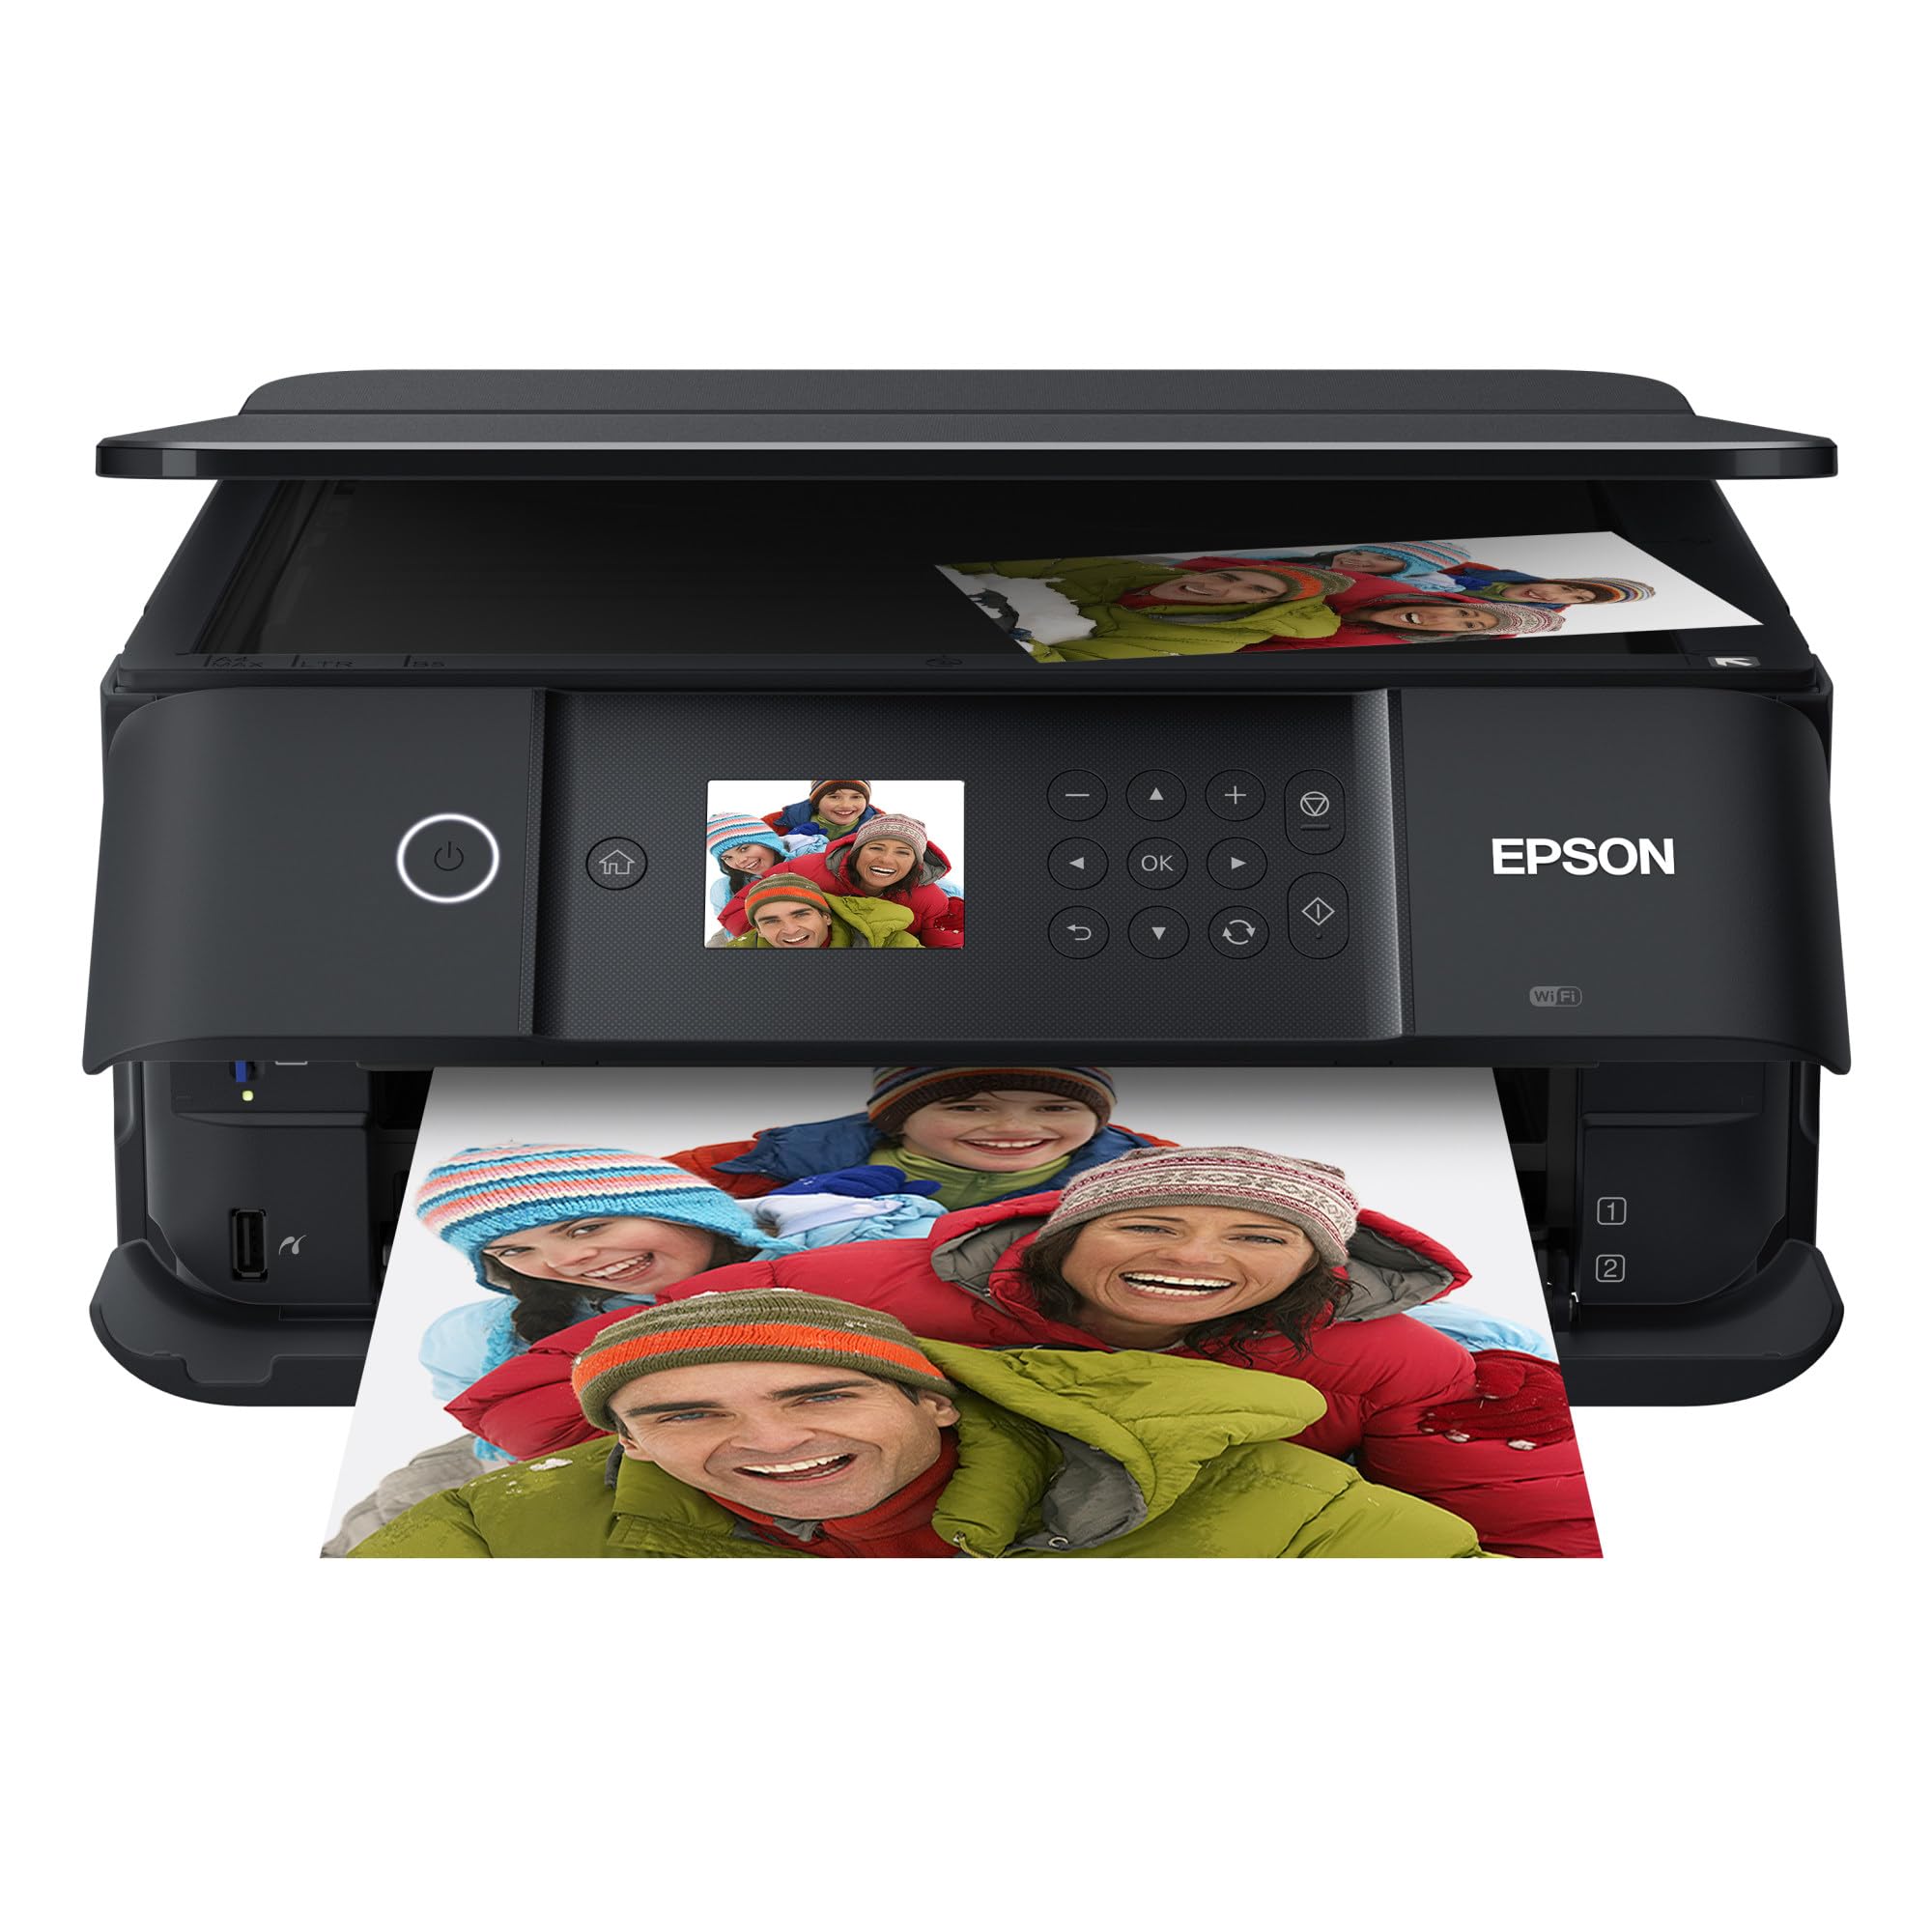 Epson Expression Premium Wireless Color Photo Printer with ADF, Scanner and Copier, Black  - Acceptable